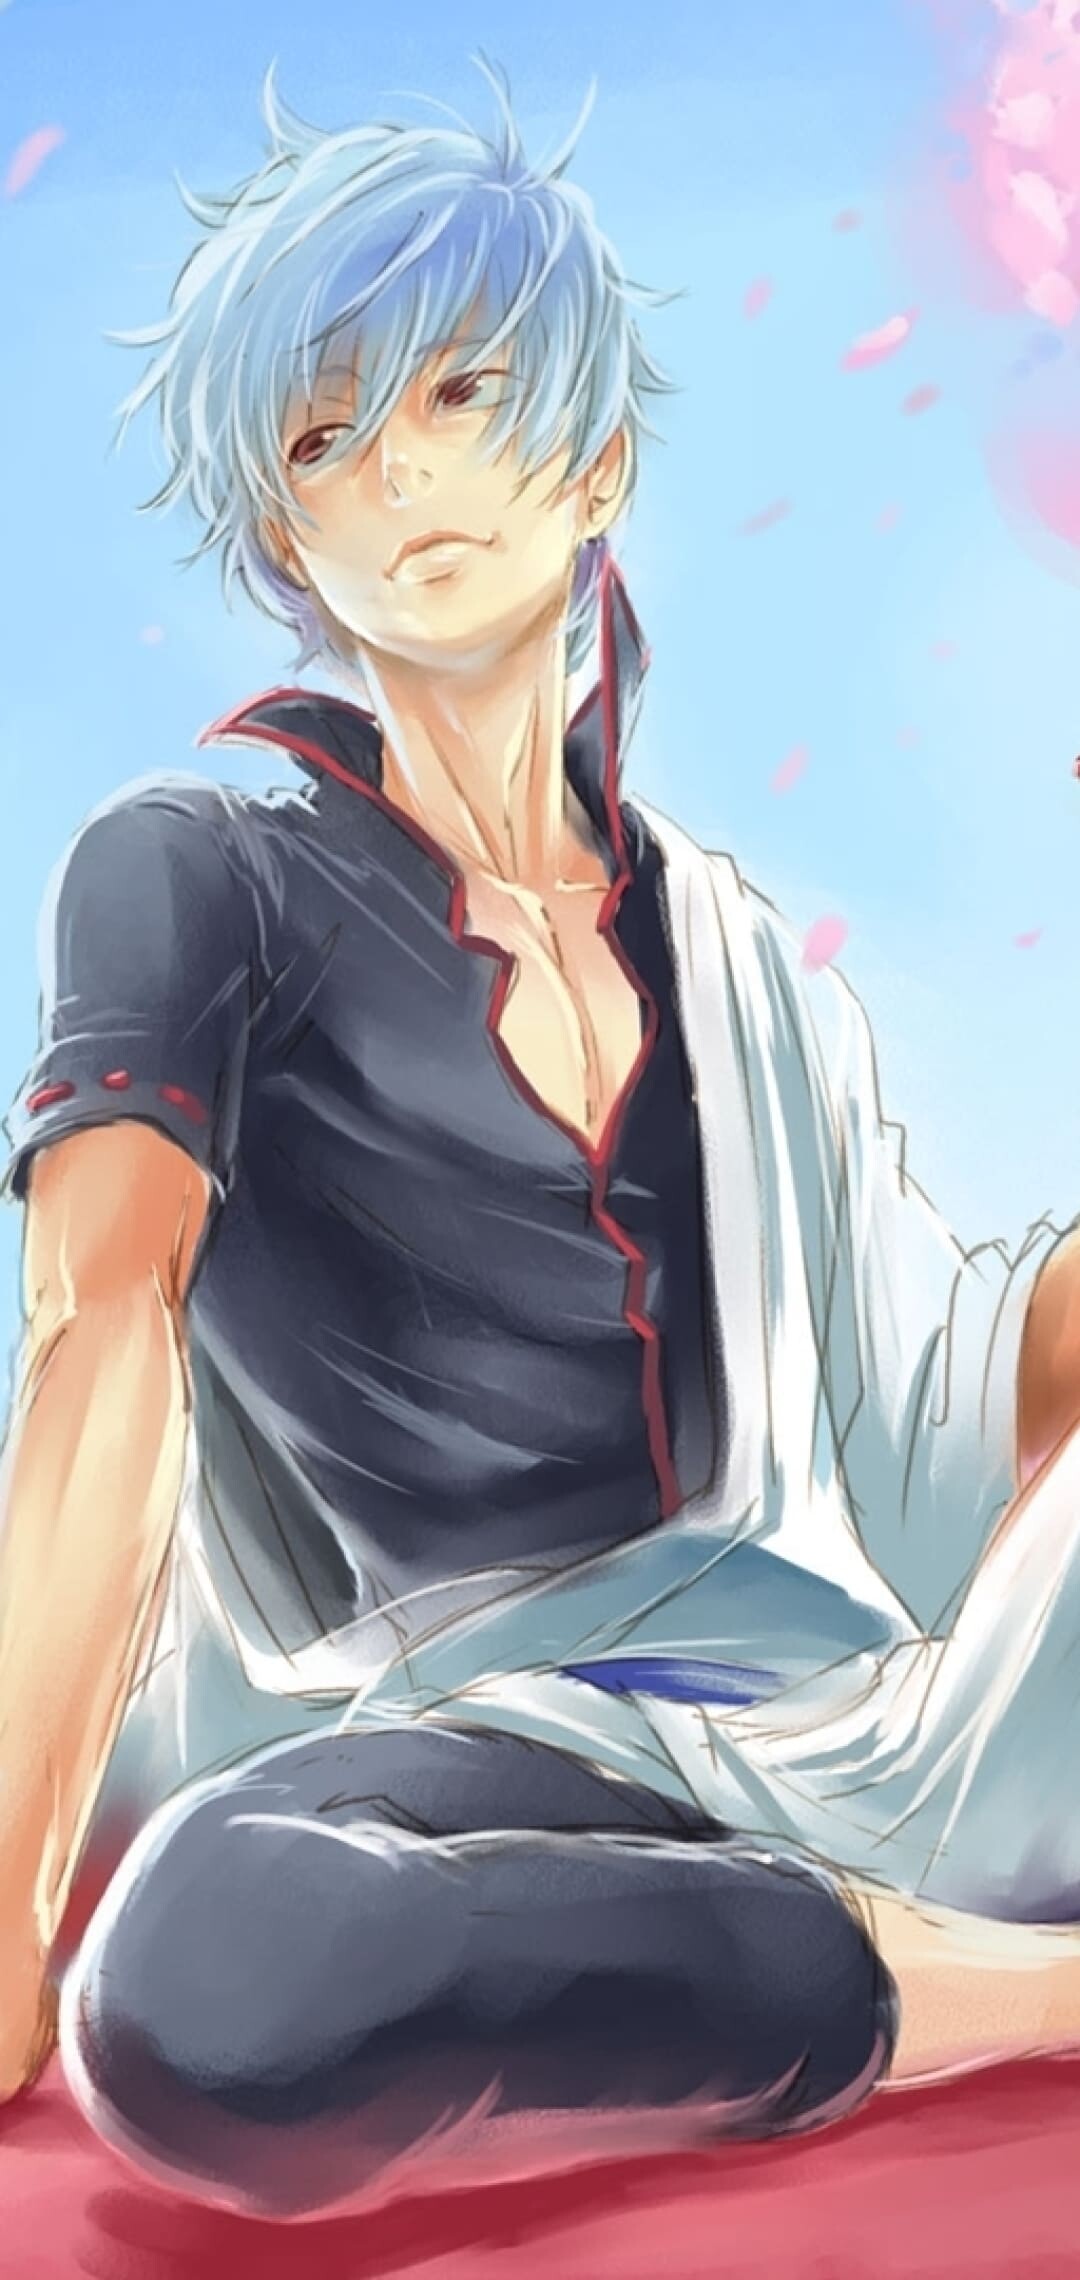 Gintoki Sakata: A man with bordeaux-colored “dead fish eyes”, nearly always half-lidded, Sarcastic and unattached. 1080x2280 HD Wallpaper.